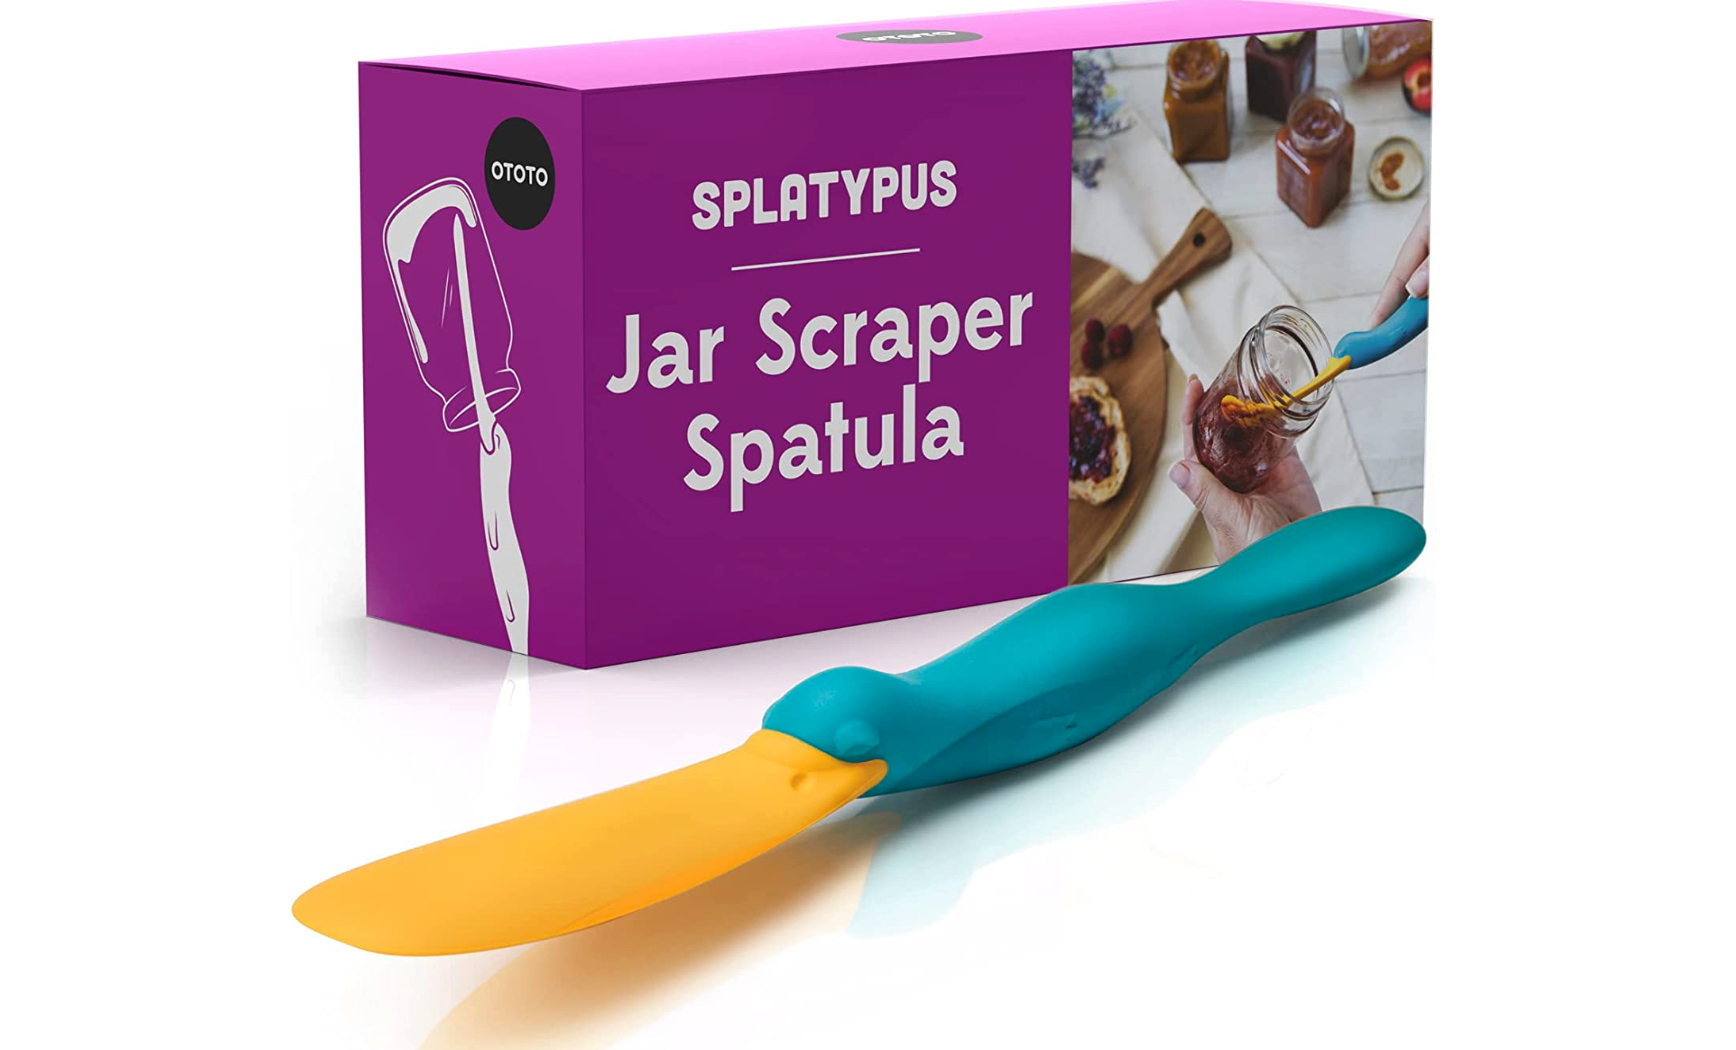 Silicone Jar & Can Spatulas - A set of 2 jar scrapers of different lengths